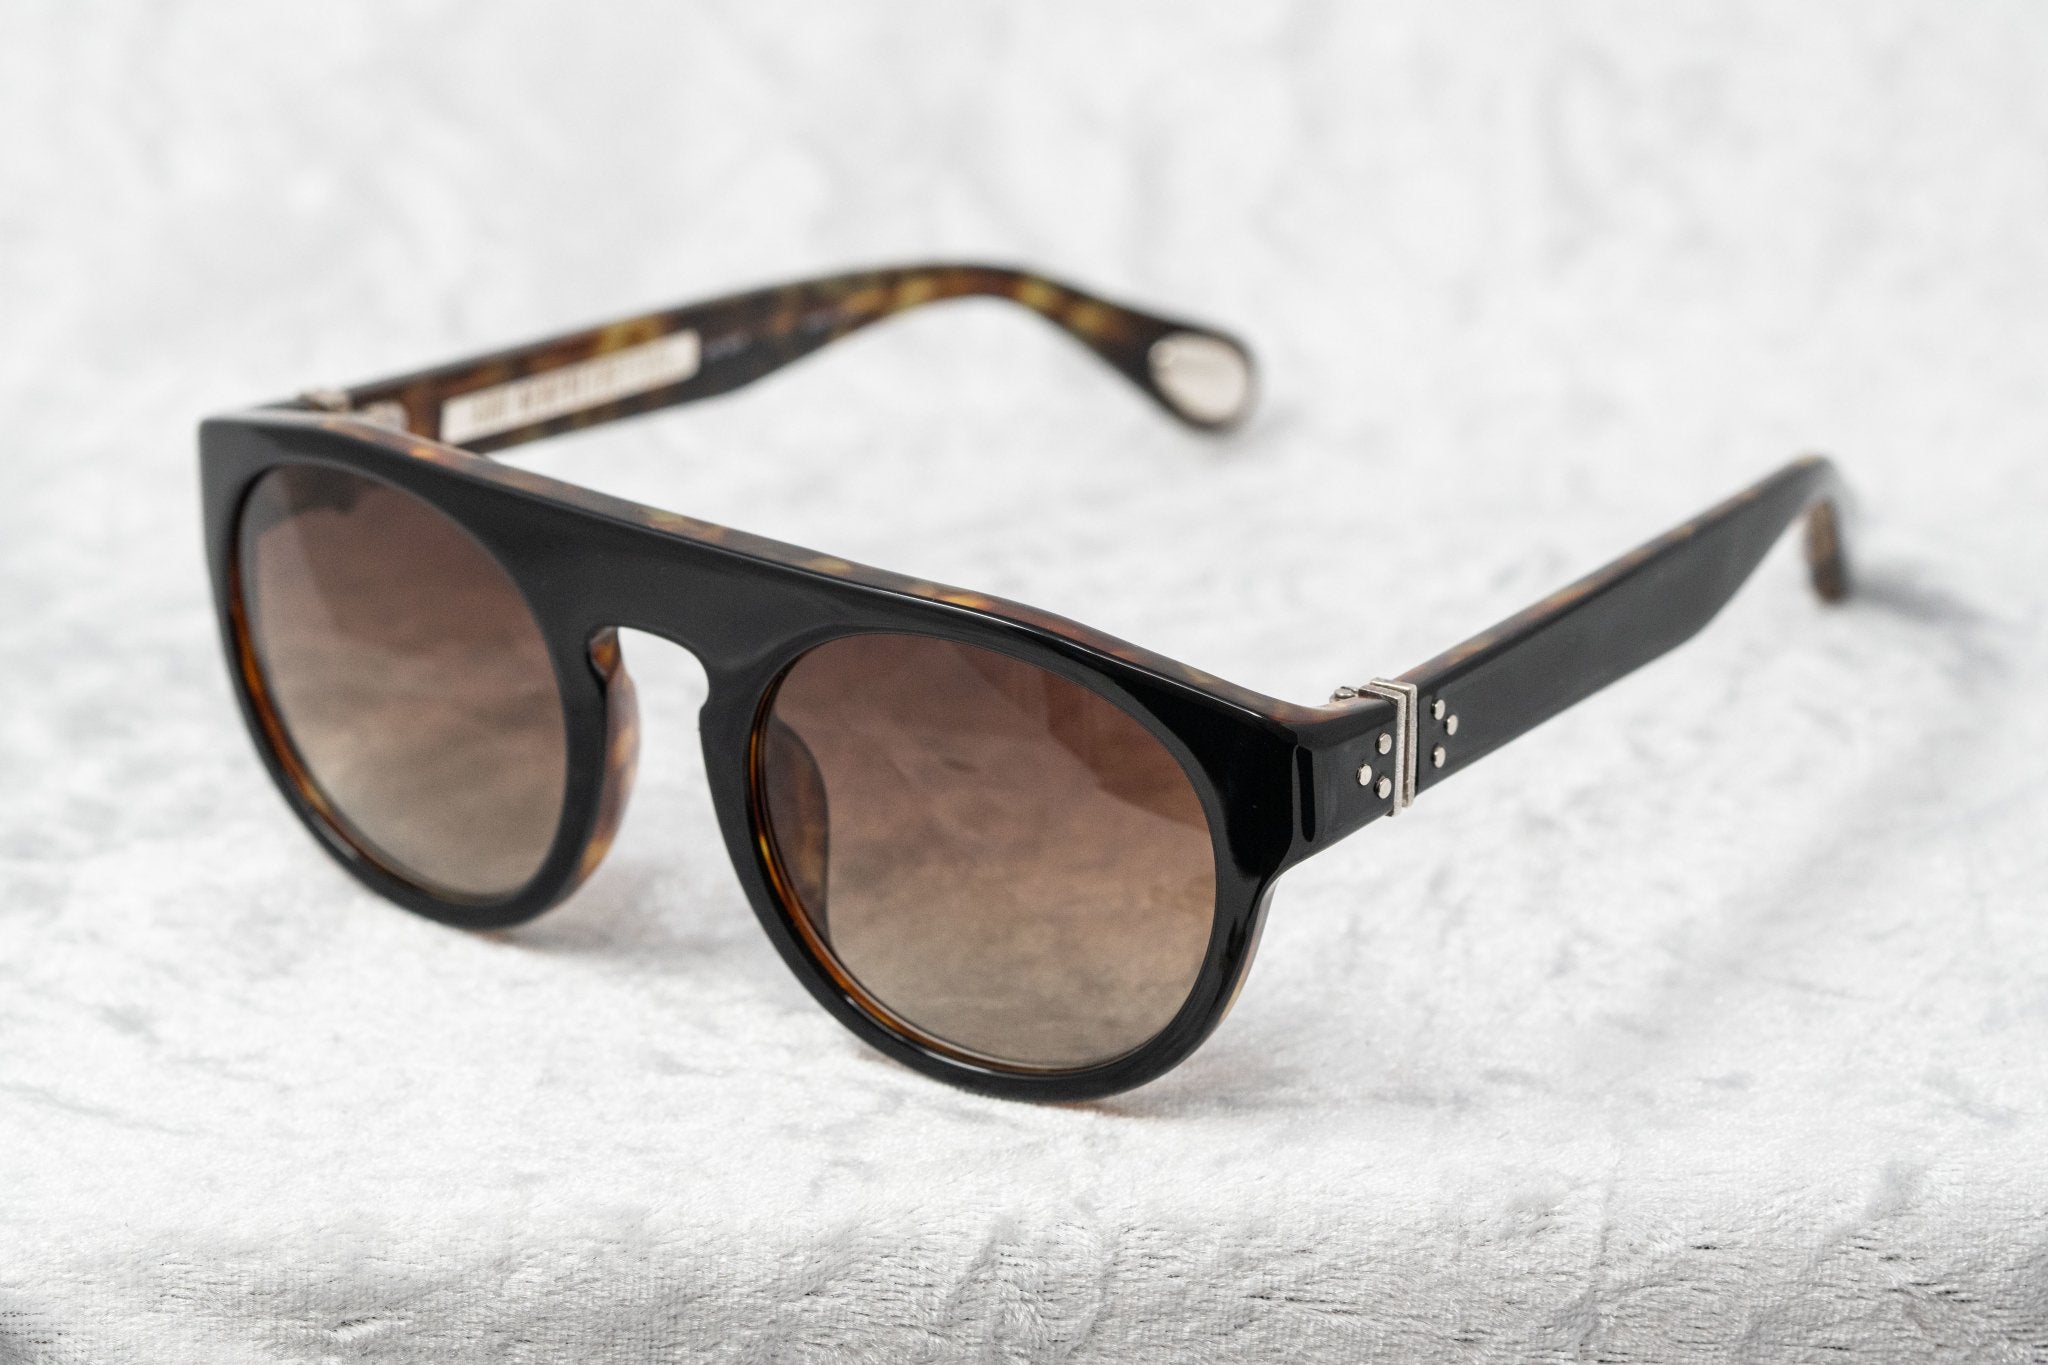 Ann Demeulemeester Sunglasses Flat Top Black & Tortoise Shell 925 Silver with Brown Graduated Lenses Category 3 AD10C6SUN - Watches & Crystals